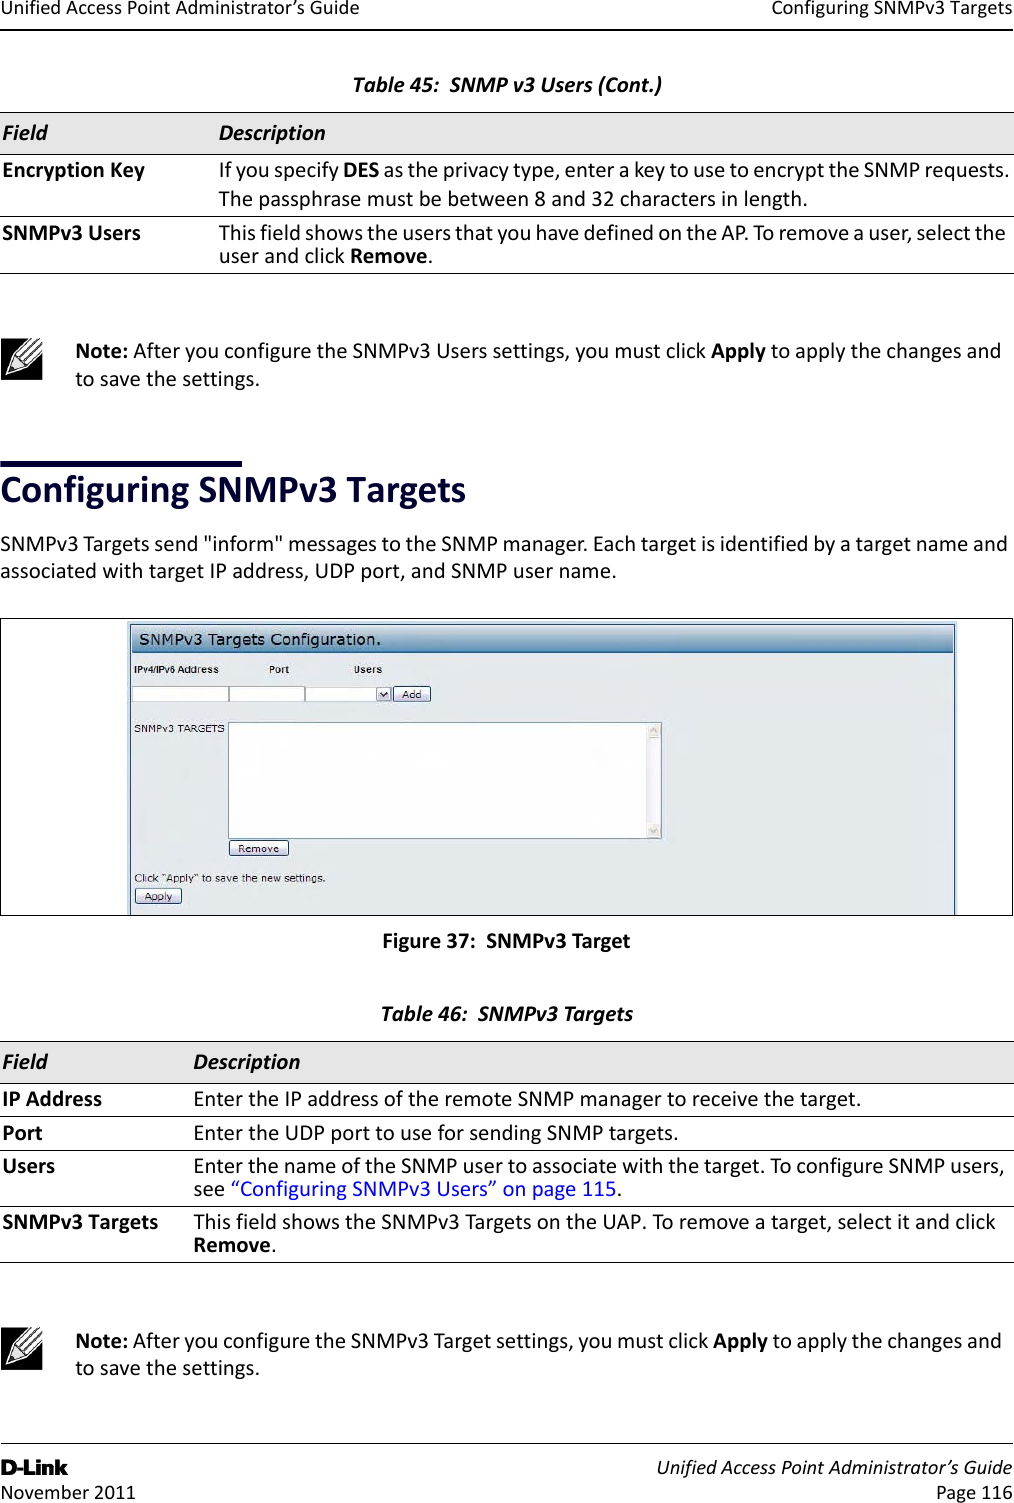 ConfiguringSNMPv3TargetsD-Link UnifiedAccessPointAdministrator’sGuide November2011 Page116UnifiedAccessPointAdministrator’sGuideConfiguringSNMPv3TargetsSNMPv3Targetssend&quot;inform&quot;messagestotheSNMPmanager.EachtargetisidentifiedbyatargetnameandassociatedwithtargetIPaddress,UDPport,andSNMPusername.Figure37:SNMPv3TargetEncryptionKey IfyouspecifyDESastheprivacytype,enterakeytousetoencrypttheSNMPrequests.Thepassphrasemustbebetween8and32charactersinlength.SNMPv3Users ThisfieldshowstheusersthatyouhavedefinedontheAP.To removeauser,selecttheuserandclickRemove.Note:AfteryouconfiguretheSNMPv3Userssettings,youmustclickApplytoapplythechangesandtosavethesettings.Table46:SNMPv3TargetsField DescriptionIPAddress EntertheIPaddressoftheremoteSNMPmanagertoreceivethetarget.Port EntertheUDPporttouseforsendingSNMPtargets.Users EnterthenameoftheSNMPusertoassociatewiththetarget.ToconfigureSNMPusers,see“ConfiguringSNMPv3Users”onpage115.SNMPv3Targets ThisfieldshowstheSNMPv3TargetsontheUAP.Toremoveatarget,selectitandclickRemove.Note:AfteryouconfiguretheSNMPv3Targetsettings,youmustclickApplytoapplythechangesandtosavethesettings.Table45:SNMPv3Users(Cont.)Field Description